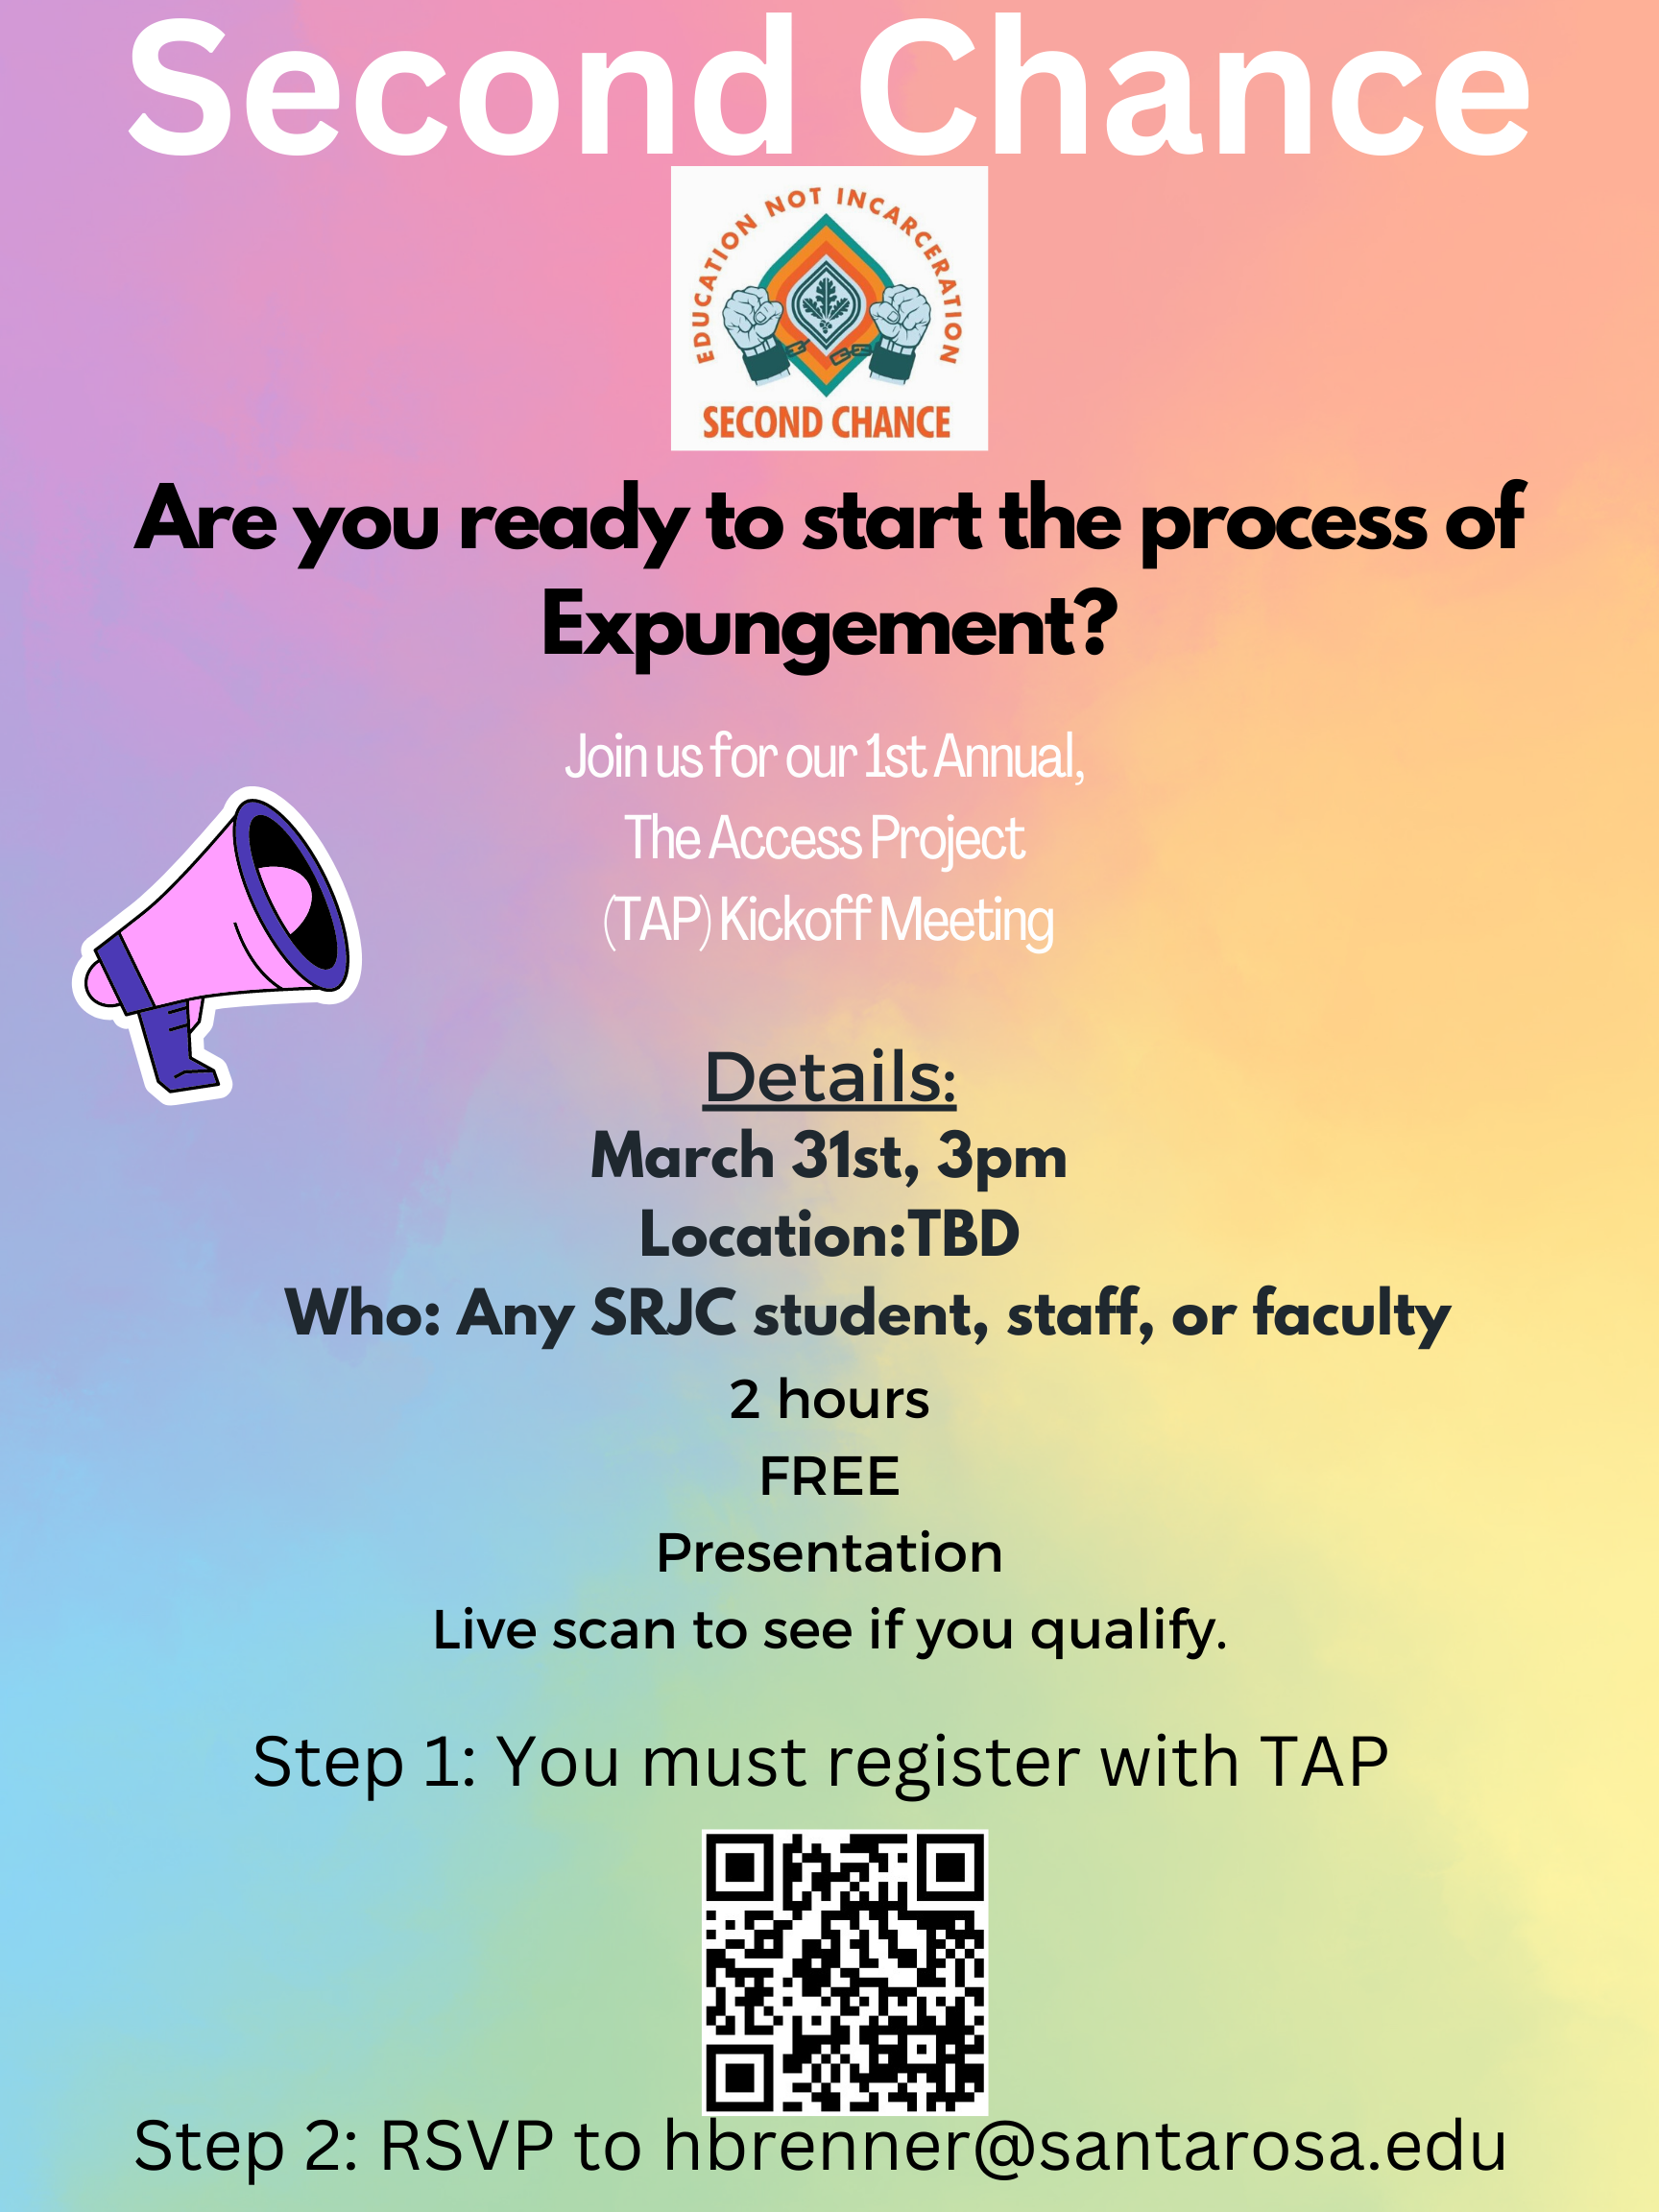 Do you have a record? Are you interested in expungement?  Expunging your record and reducing your felonies, wherever possible, can make a difference when you are applying for jobs, looking for housing, and working to put the justice system behind you. The SRJC Second Chance and Rising Scholars programs around the state are teaming up with The Access Project, a non-profit legal services organization, to provide FREE clean slate services to our campus community. This program is open to all current SRJC students, staff, faculty, and their immediate families. If you're not sure whether this program can benefit you, I encourage you to register and get your RAP so that The Access Project can advise you on what might be available to you.  There are many new laws that might help!  You can also check out their FAQs for more information on what clean slate can do for you.   IMPORTANT:  To get started, you MUST register by going to AccessProjectCA.org/RSN. Then, attend the kickoff meeting at 3pm on March 31st on the SRJC Santa Rosa Campus, RSVP for this event to hbrenner@santarosa.edu.  A representative from The Access Project will be here to introduce the program and answer your questions, and a Live Scan operator will be on site to process your fingerprints so that you can get a copy of your official RAP sheet.  If you absolutely can't make the meeting, you should still register, and you'll receive instructions on visiting a local Live Scan operator on your own to be fingerprinted.   There is more information on The Access Project's website, and you can also sign up for virtual office hours here.   Please share this information in your classes, offices, with your colleagues and students. 